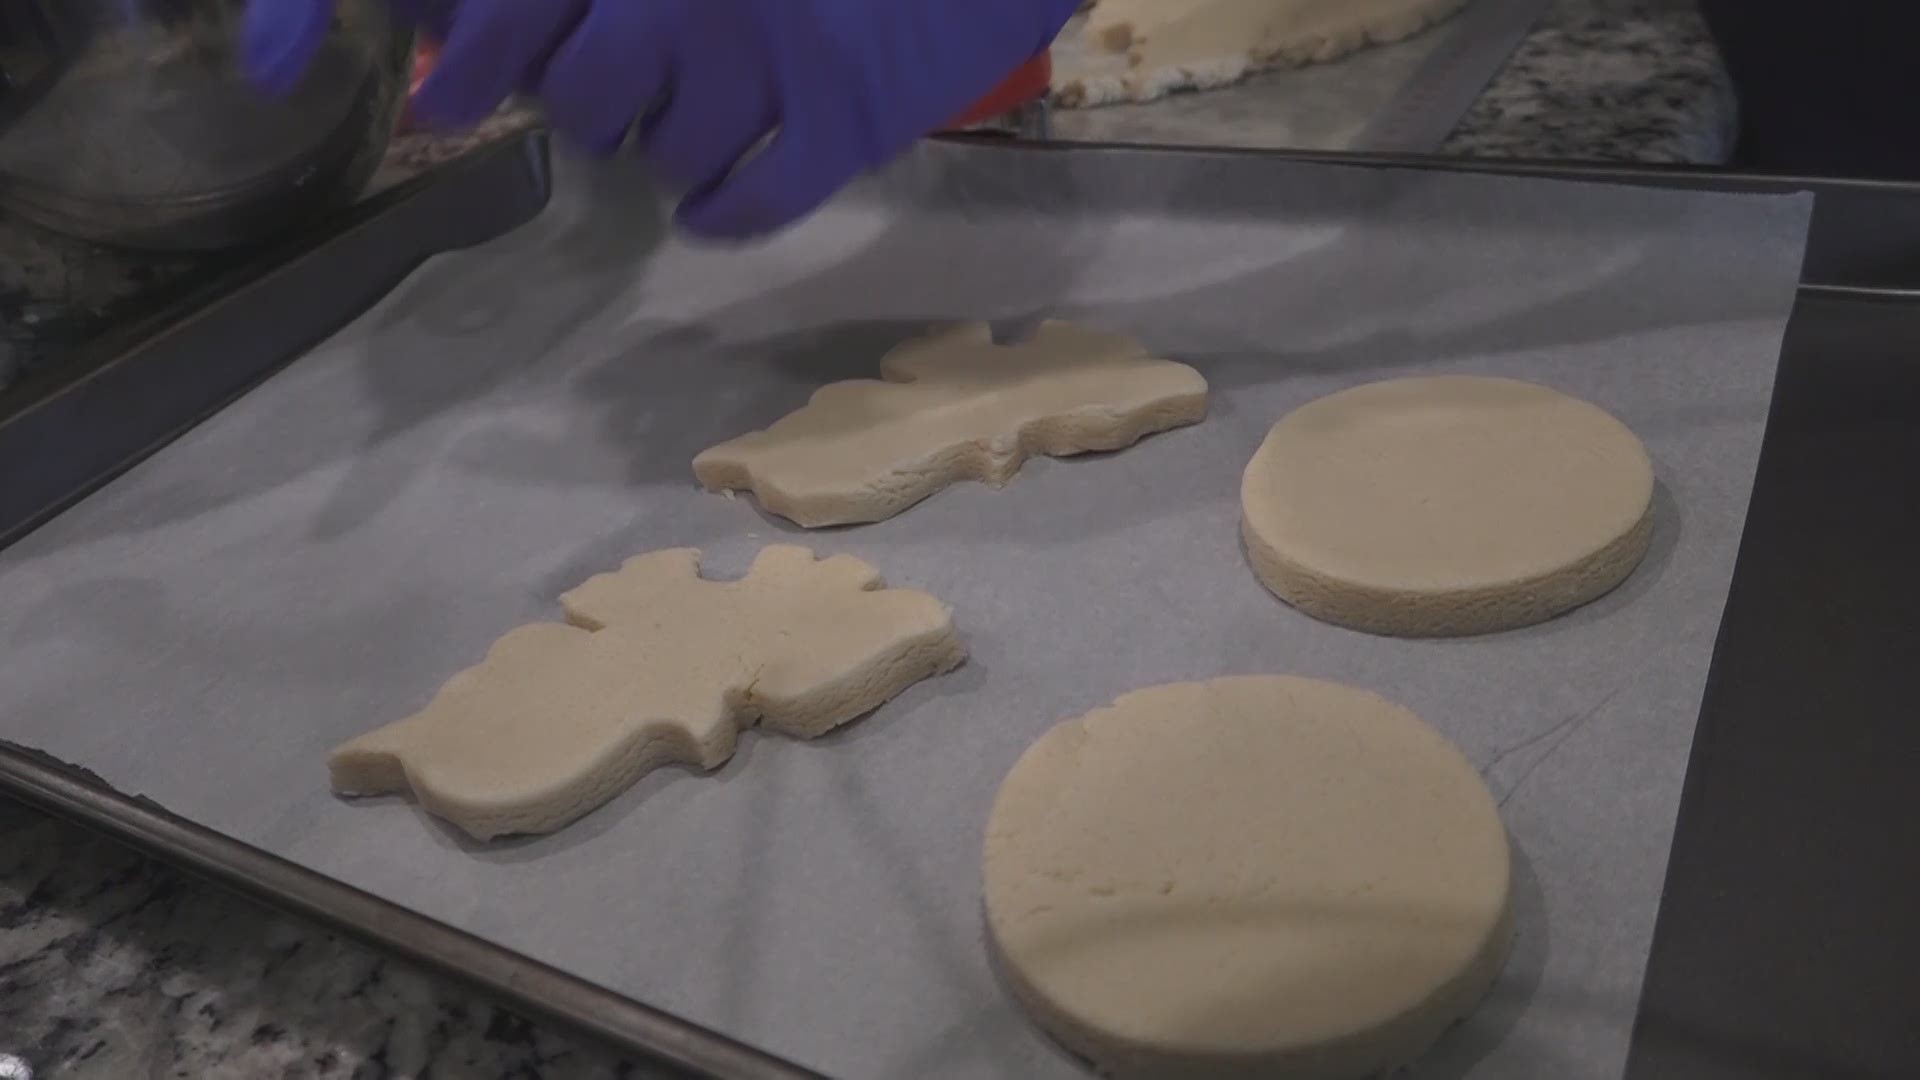 San Antonio mother Danielle Webber offers a behind-the-scenes look at cookie decorating from her successful business, the Cookie MOMster.